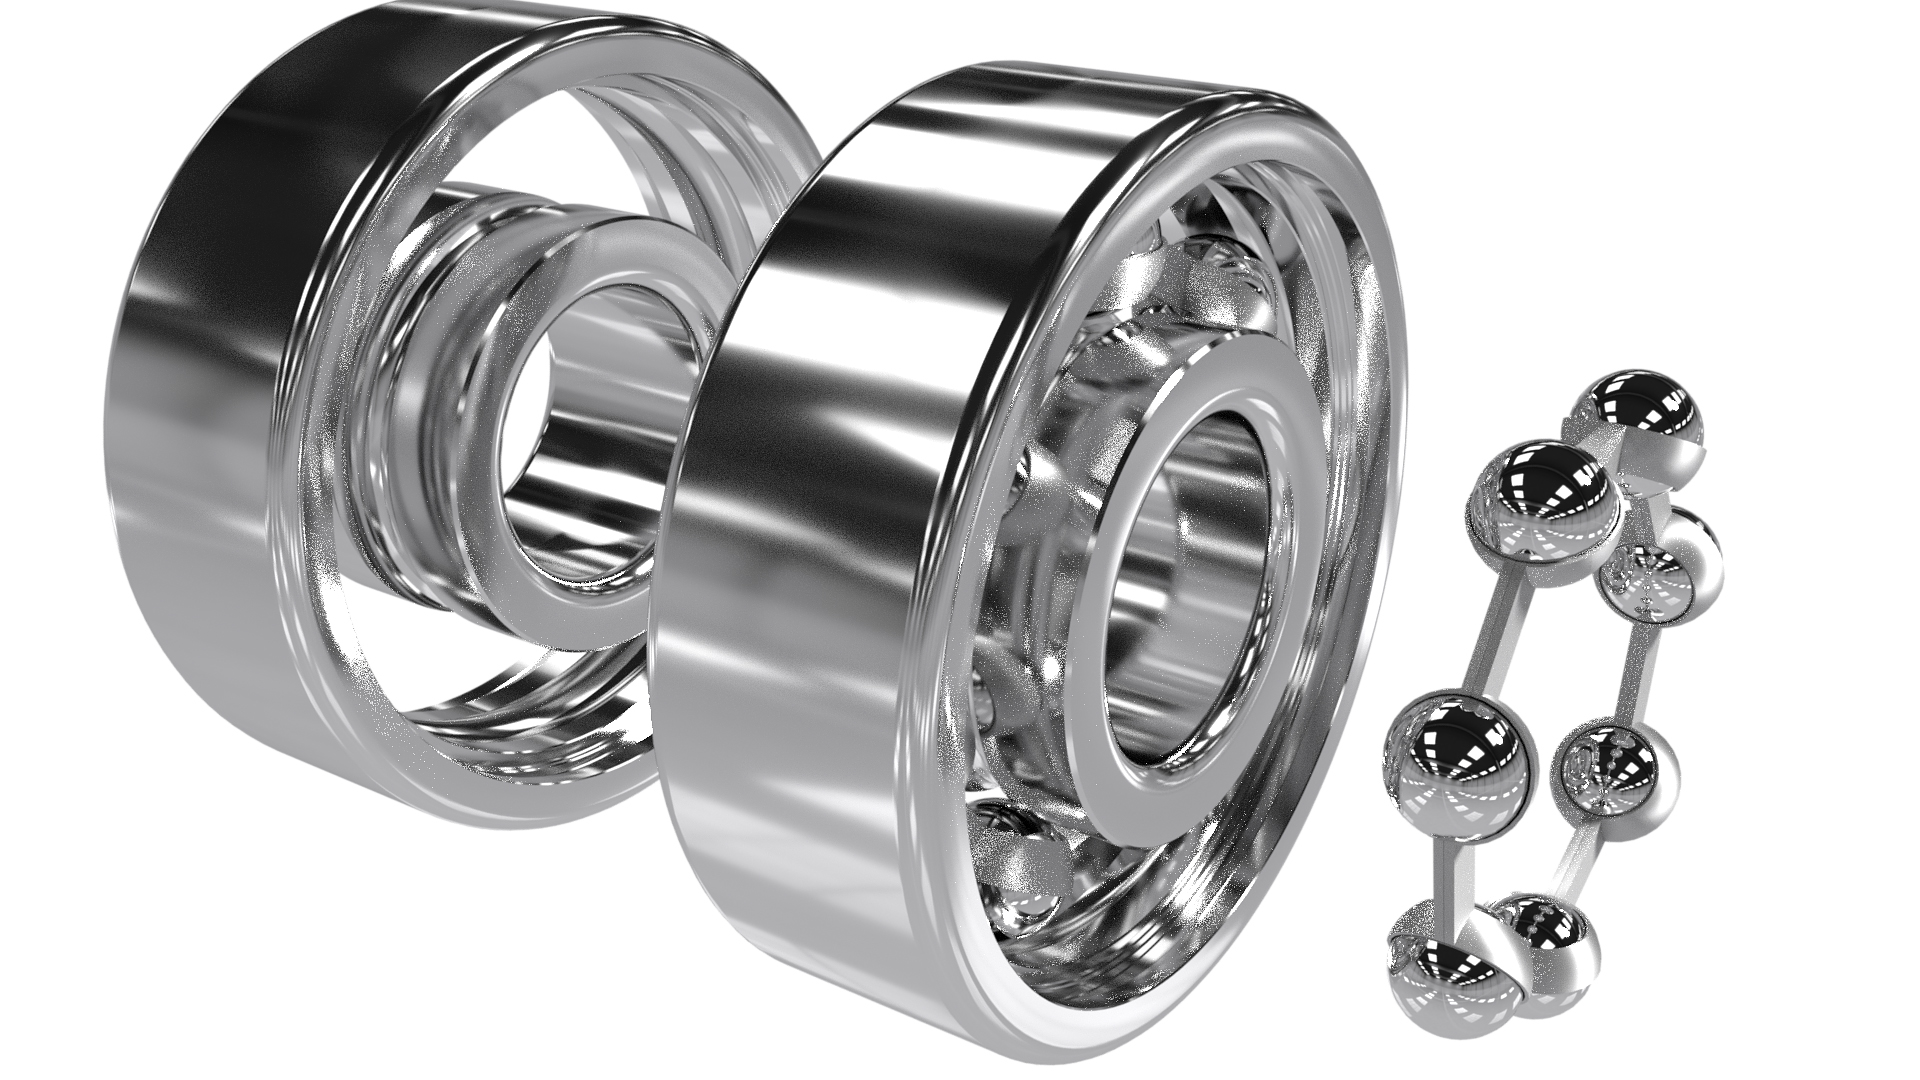 A ball bearing piece expanded to view the components that make it up.